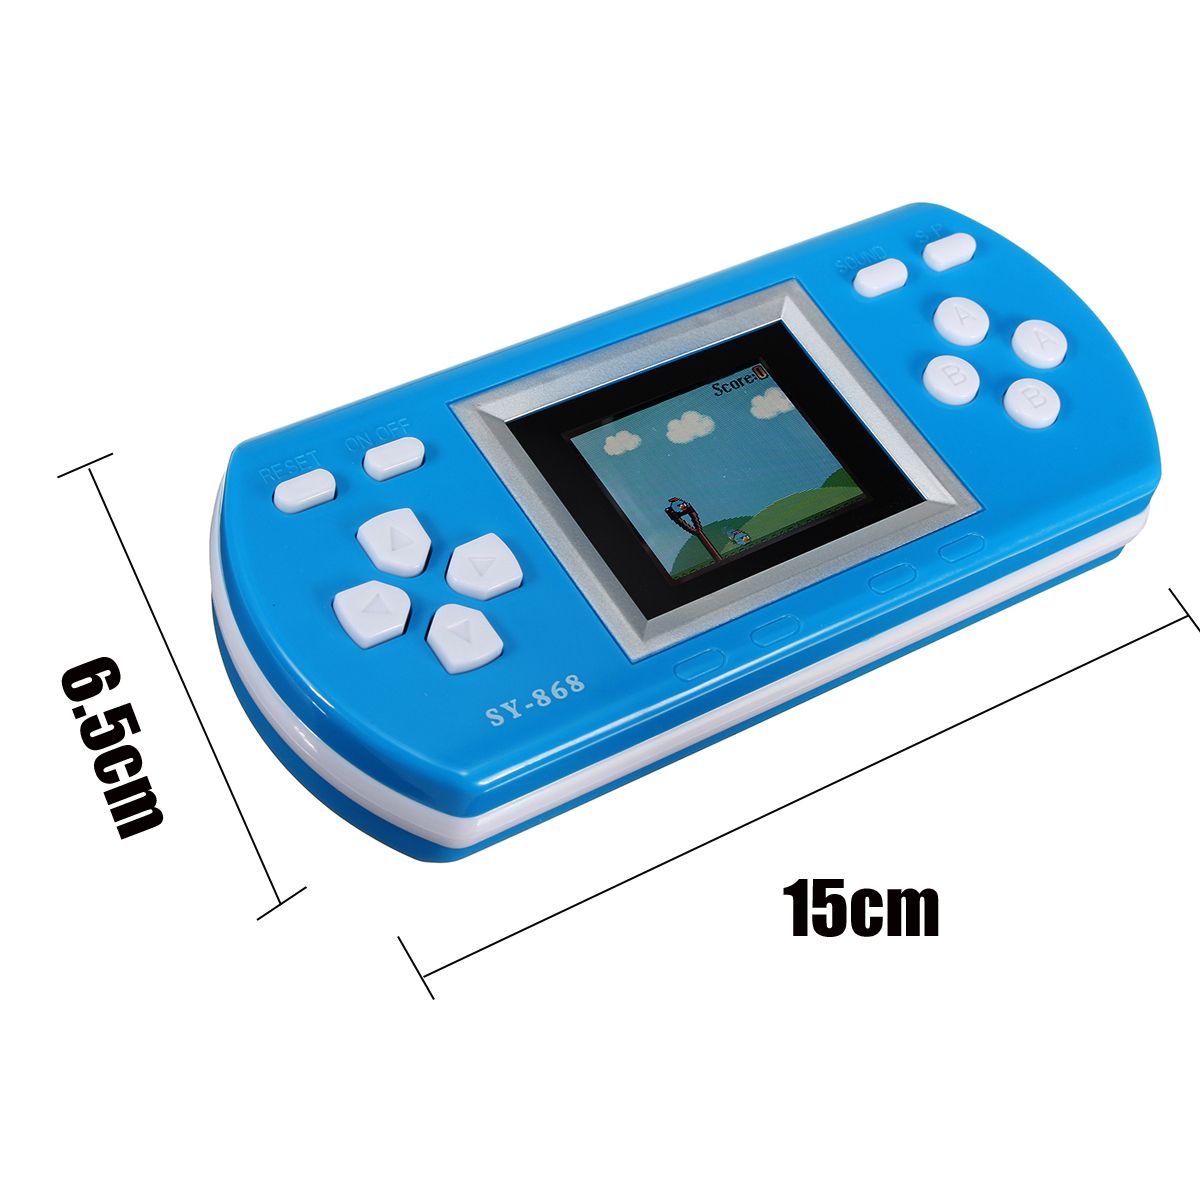 SY-868-230-in-1-18-Inch-Screen-Digital-Colorful-Handheld-Retro-Game-Console-1344710